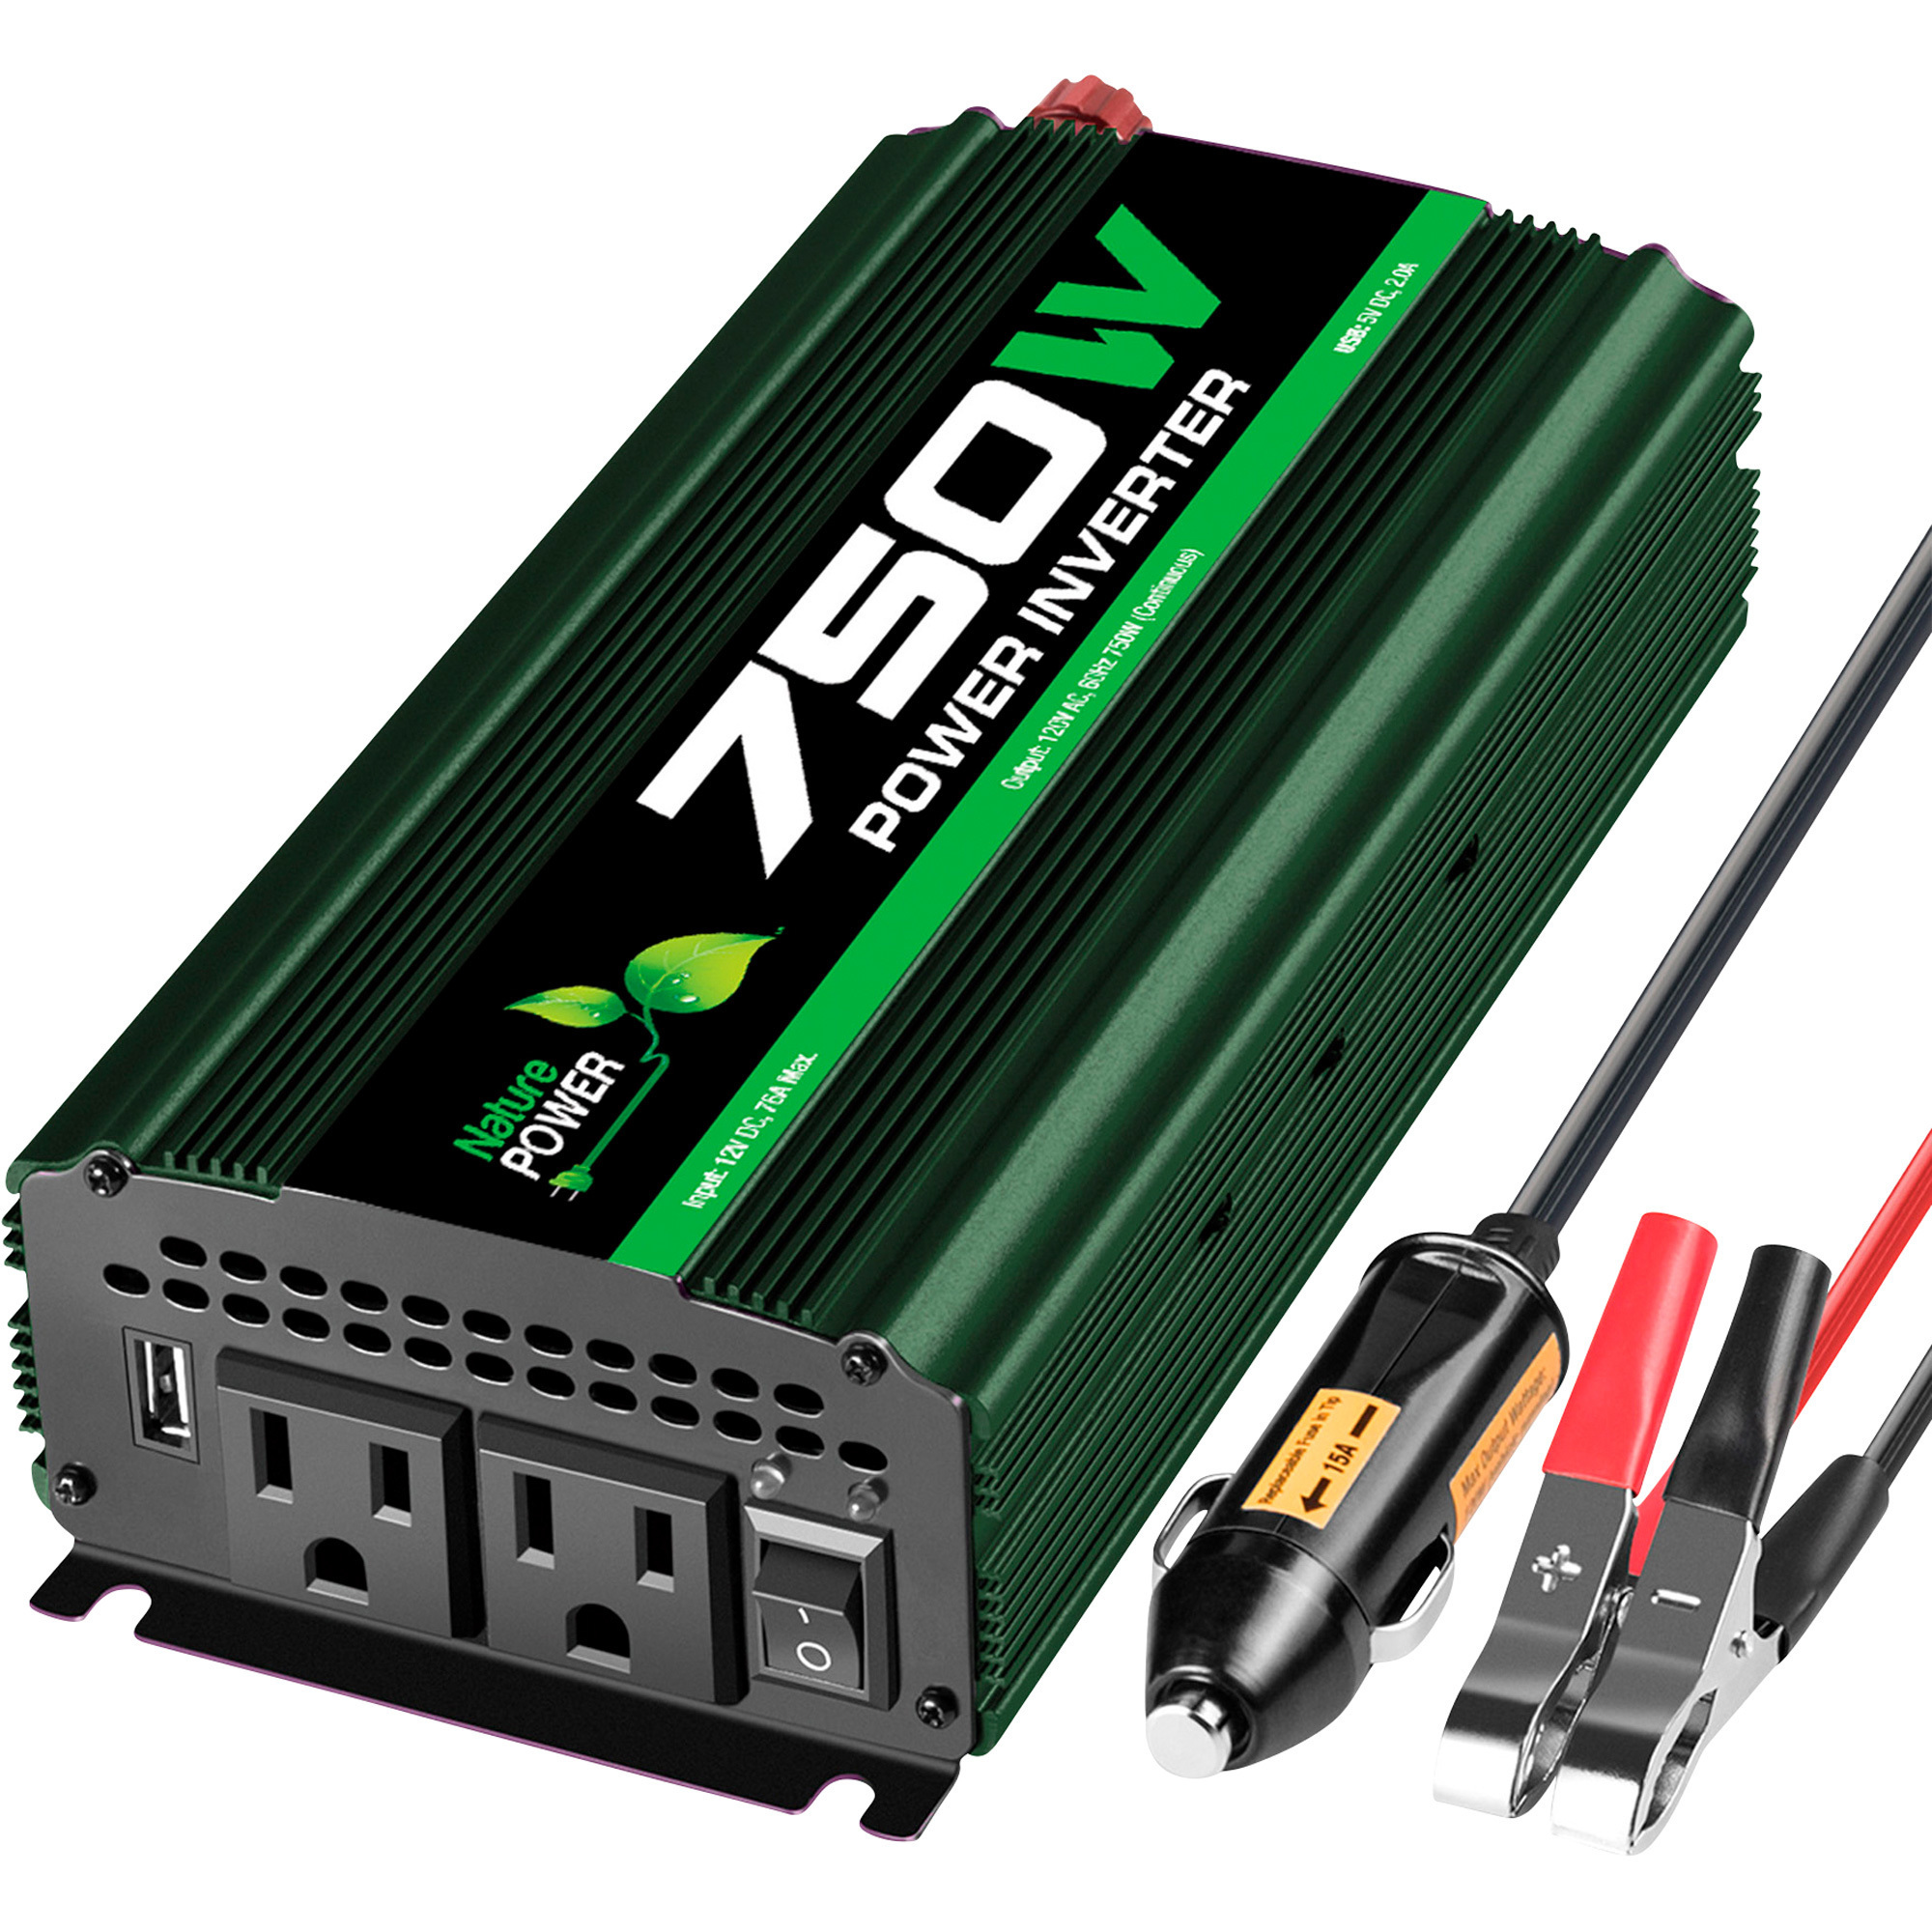 Nature Power Modified Sine Wave Power Inverter - 750 Continuous Watts, 2 Outlets/2 USB Ports, Model 37750